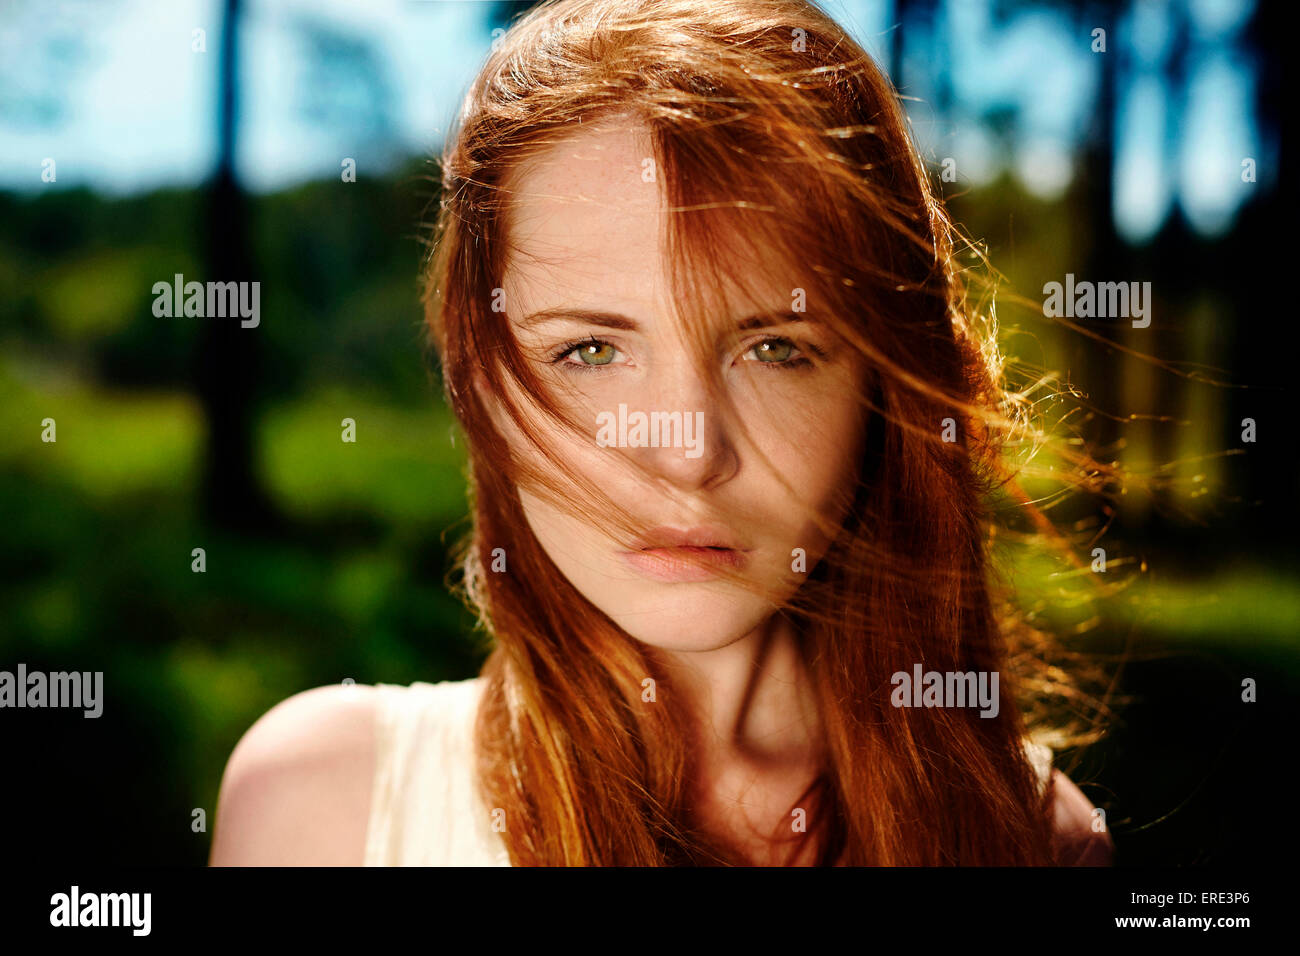 Caucasian woman with red hair in wind Stock Photo